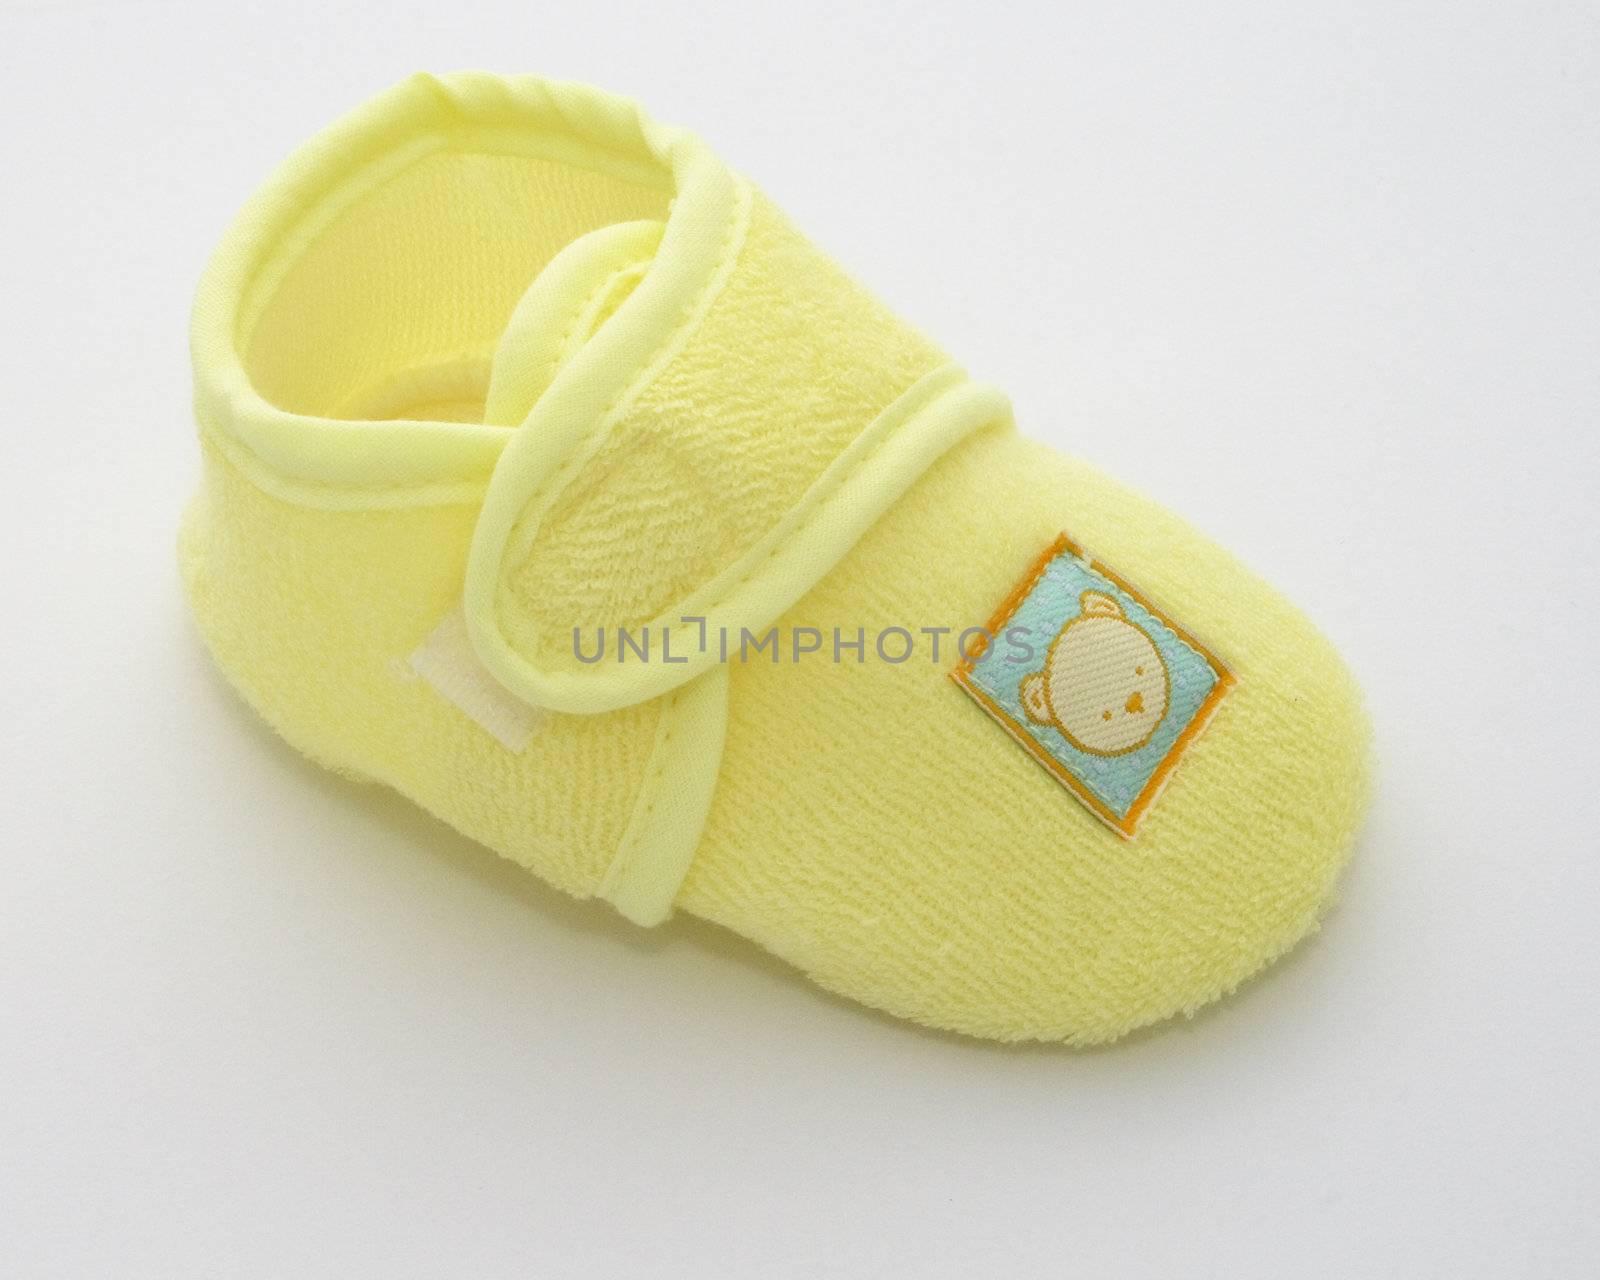 one babies shoe by leafy